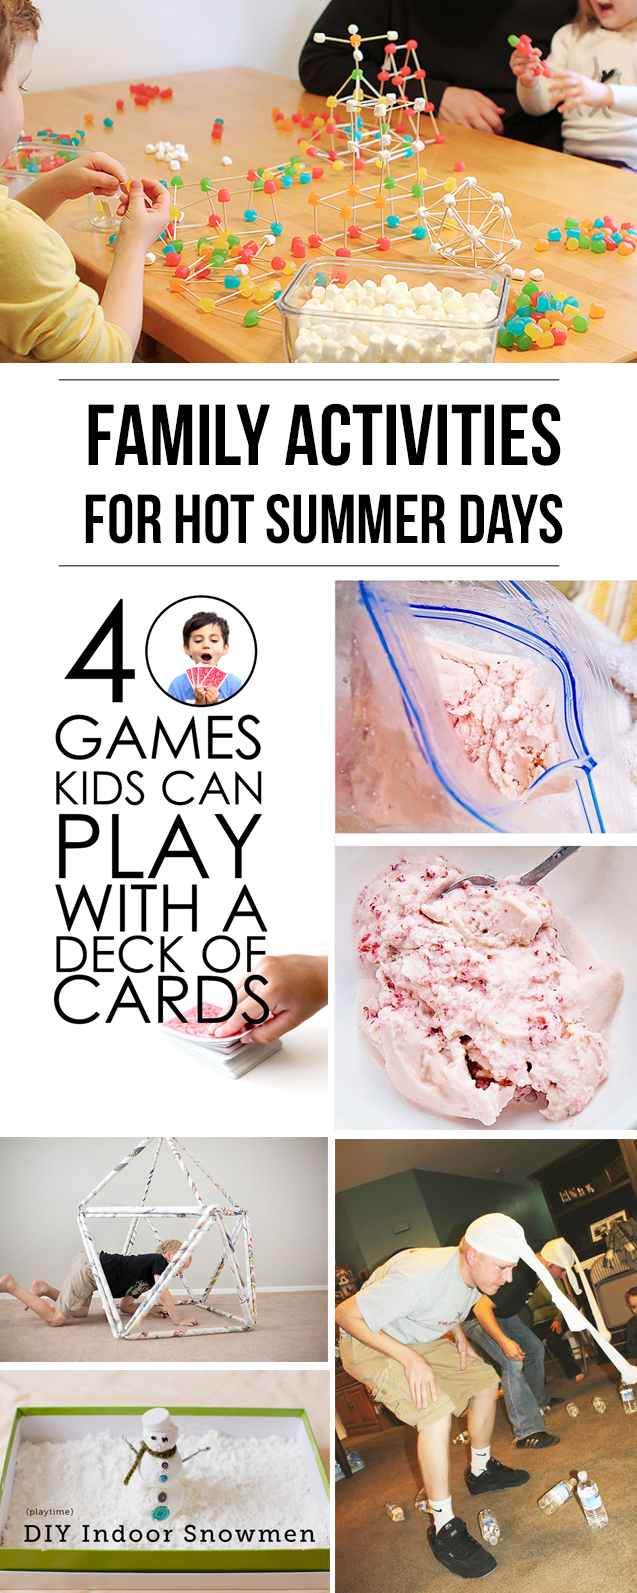 Indoor activities for families on hot summer days - going to try them all! #QuakerUp #spon